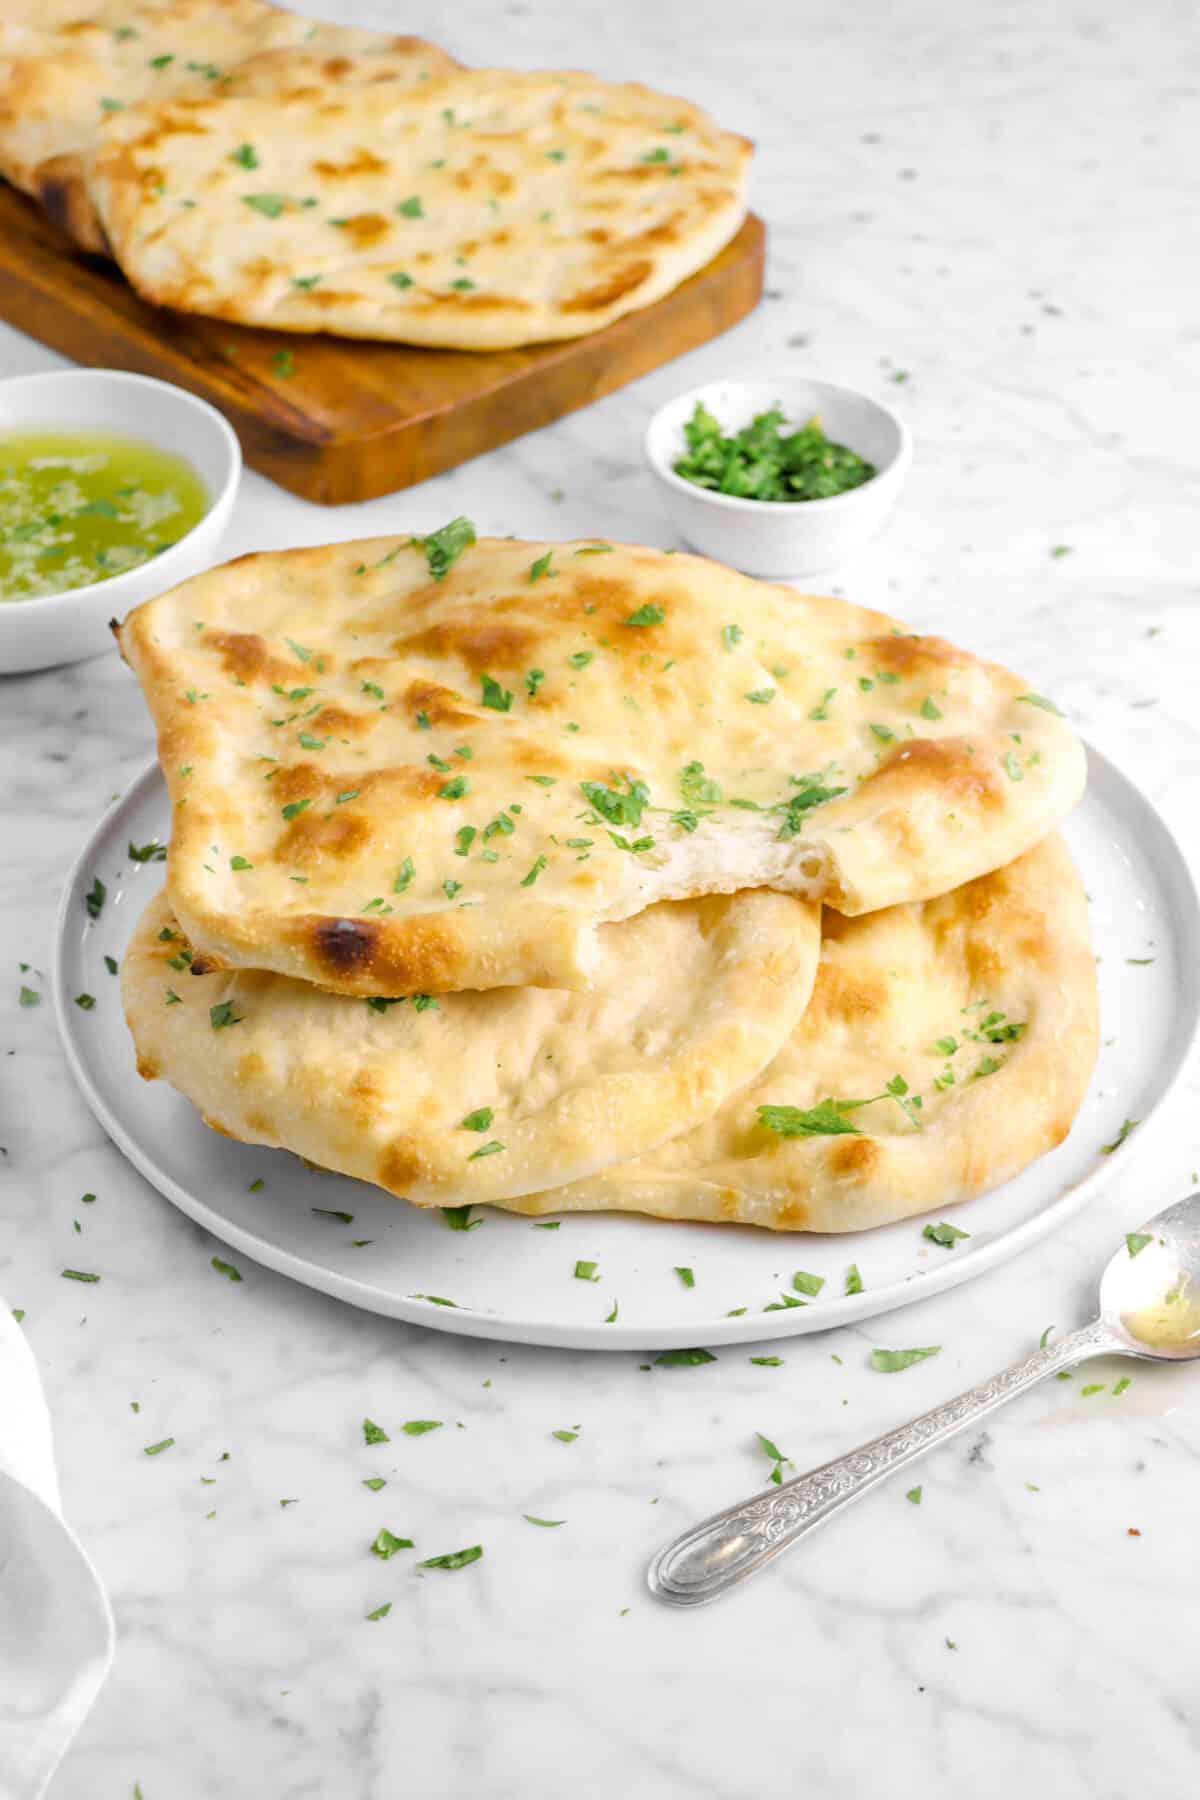 torn naan atop two others on a white plate with spoon, chopped parsley, and more naan behind